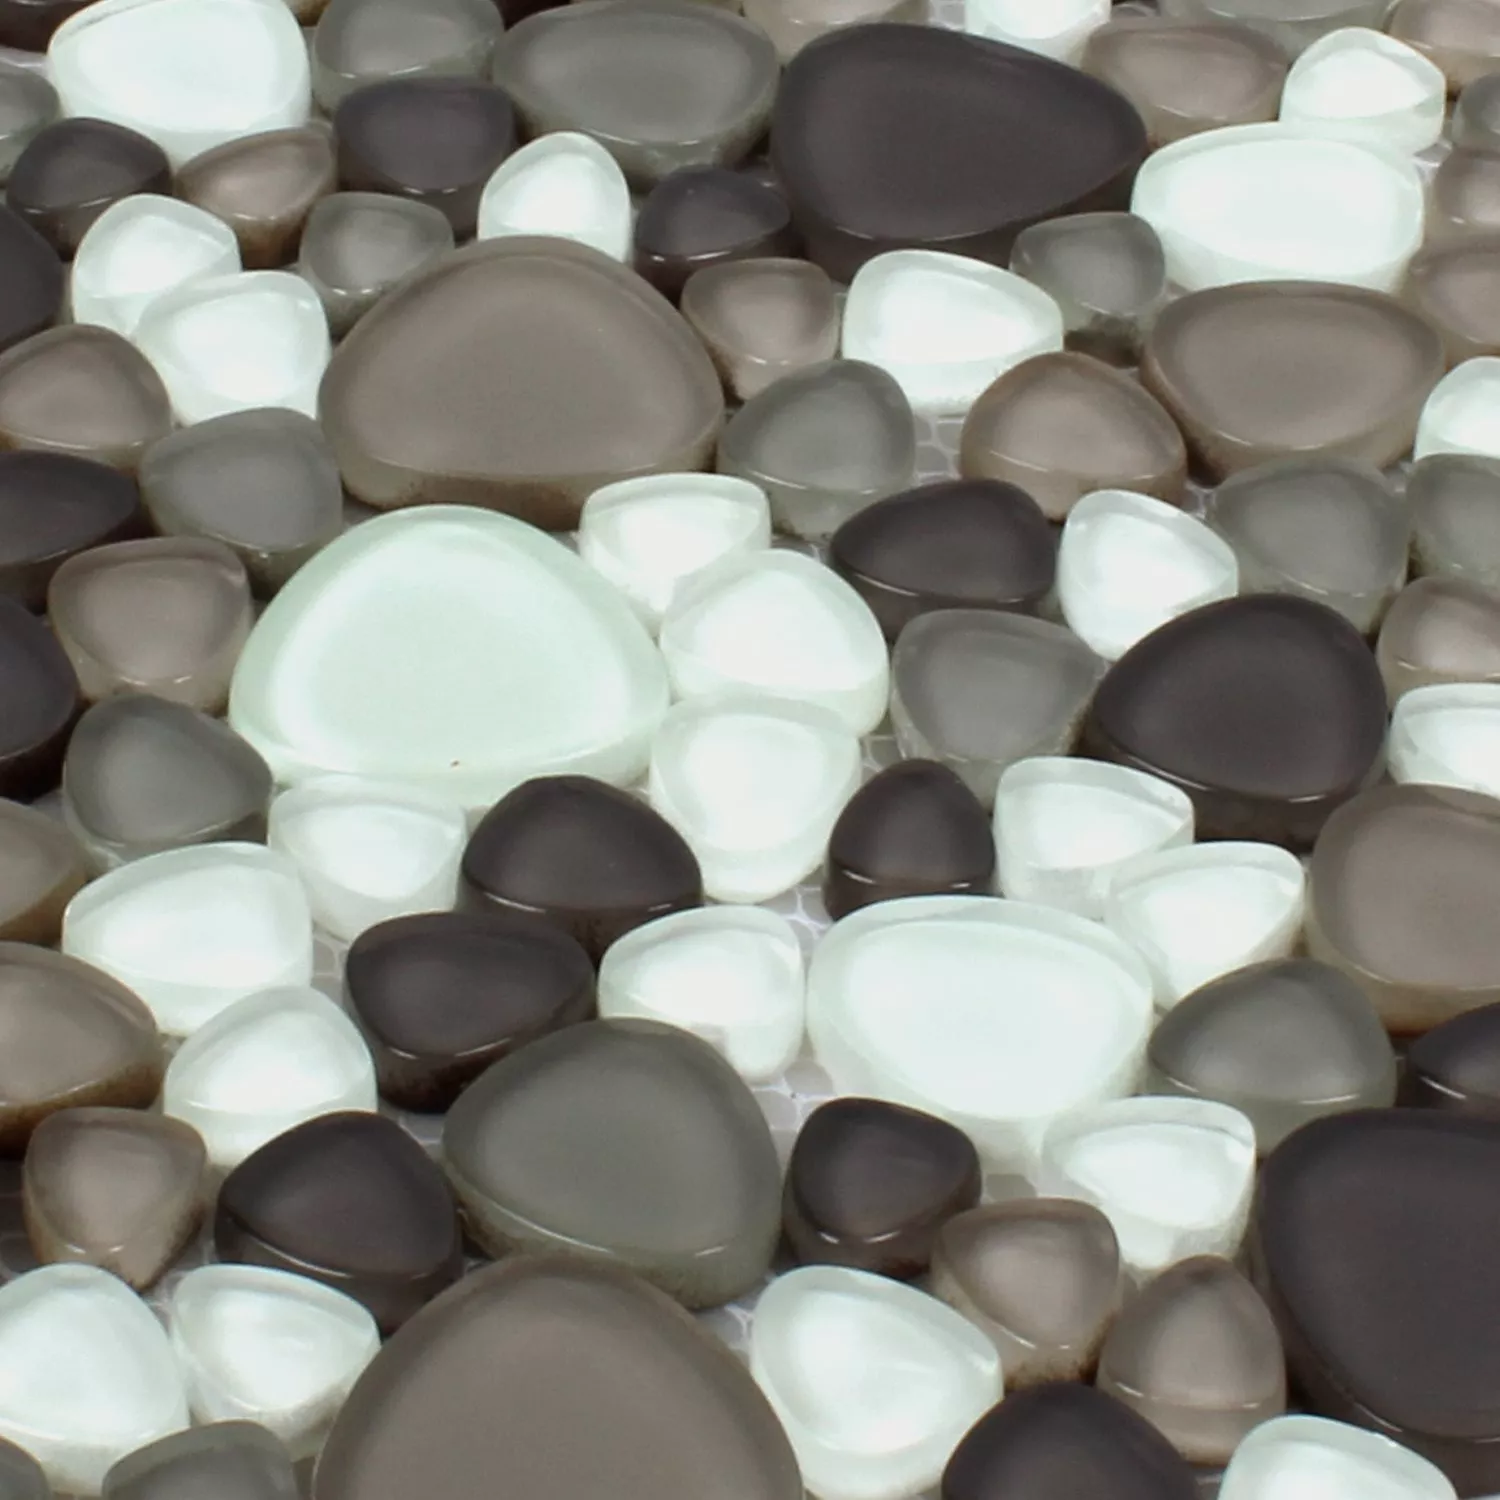 Glass Mosaic Tiles Usedom Brown Beige